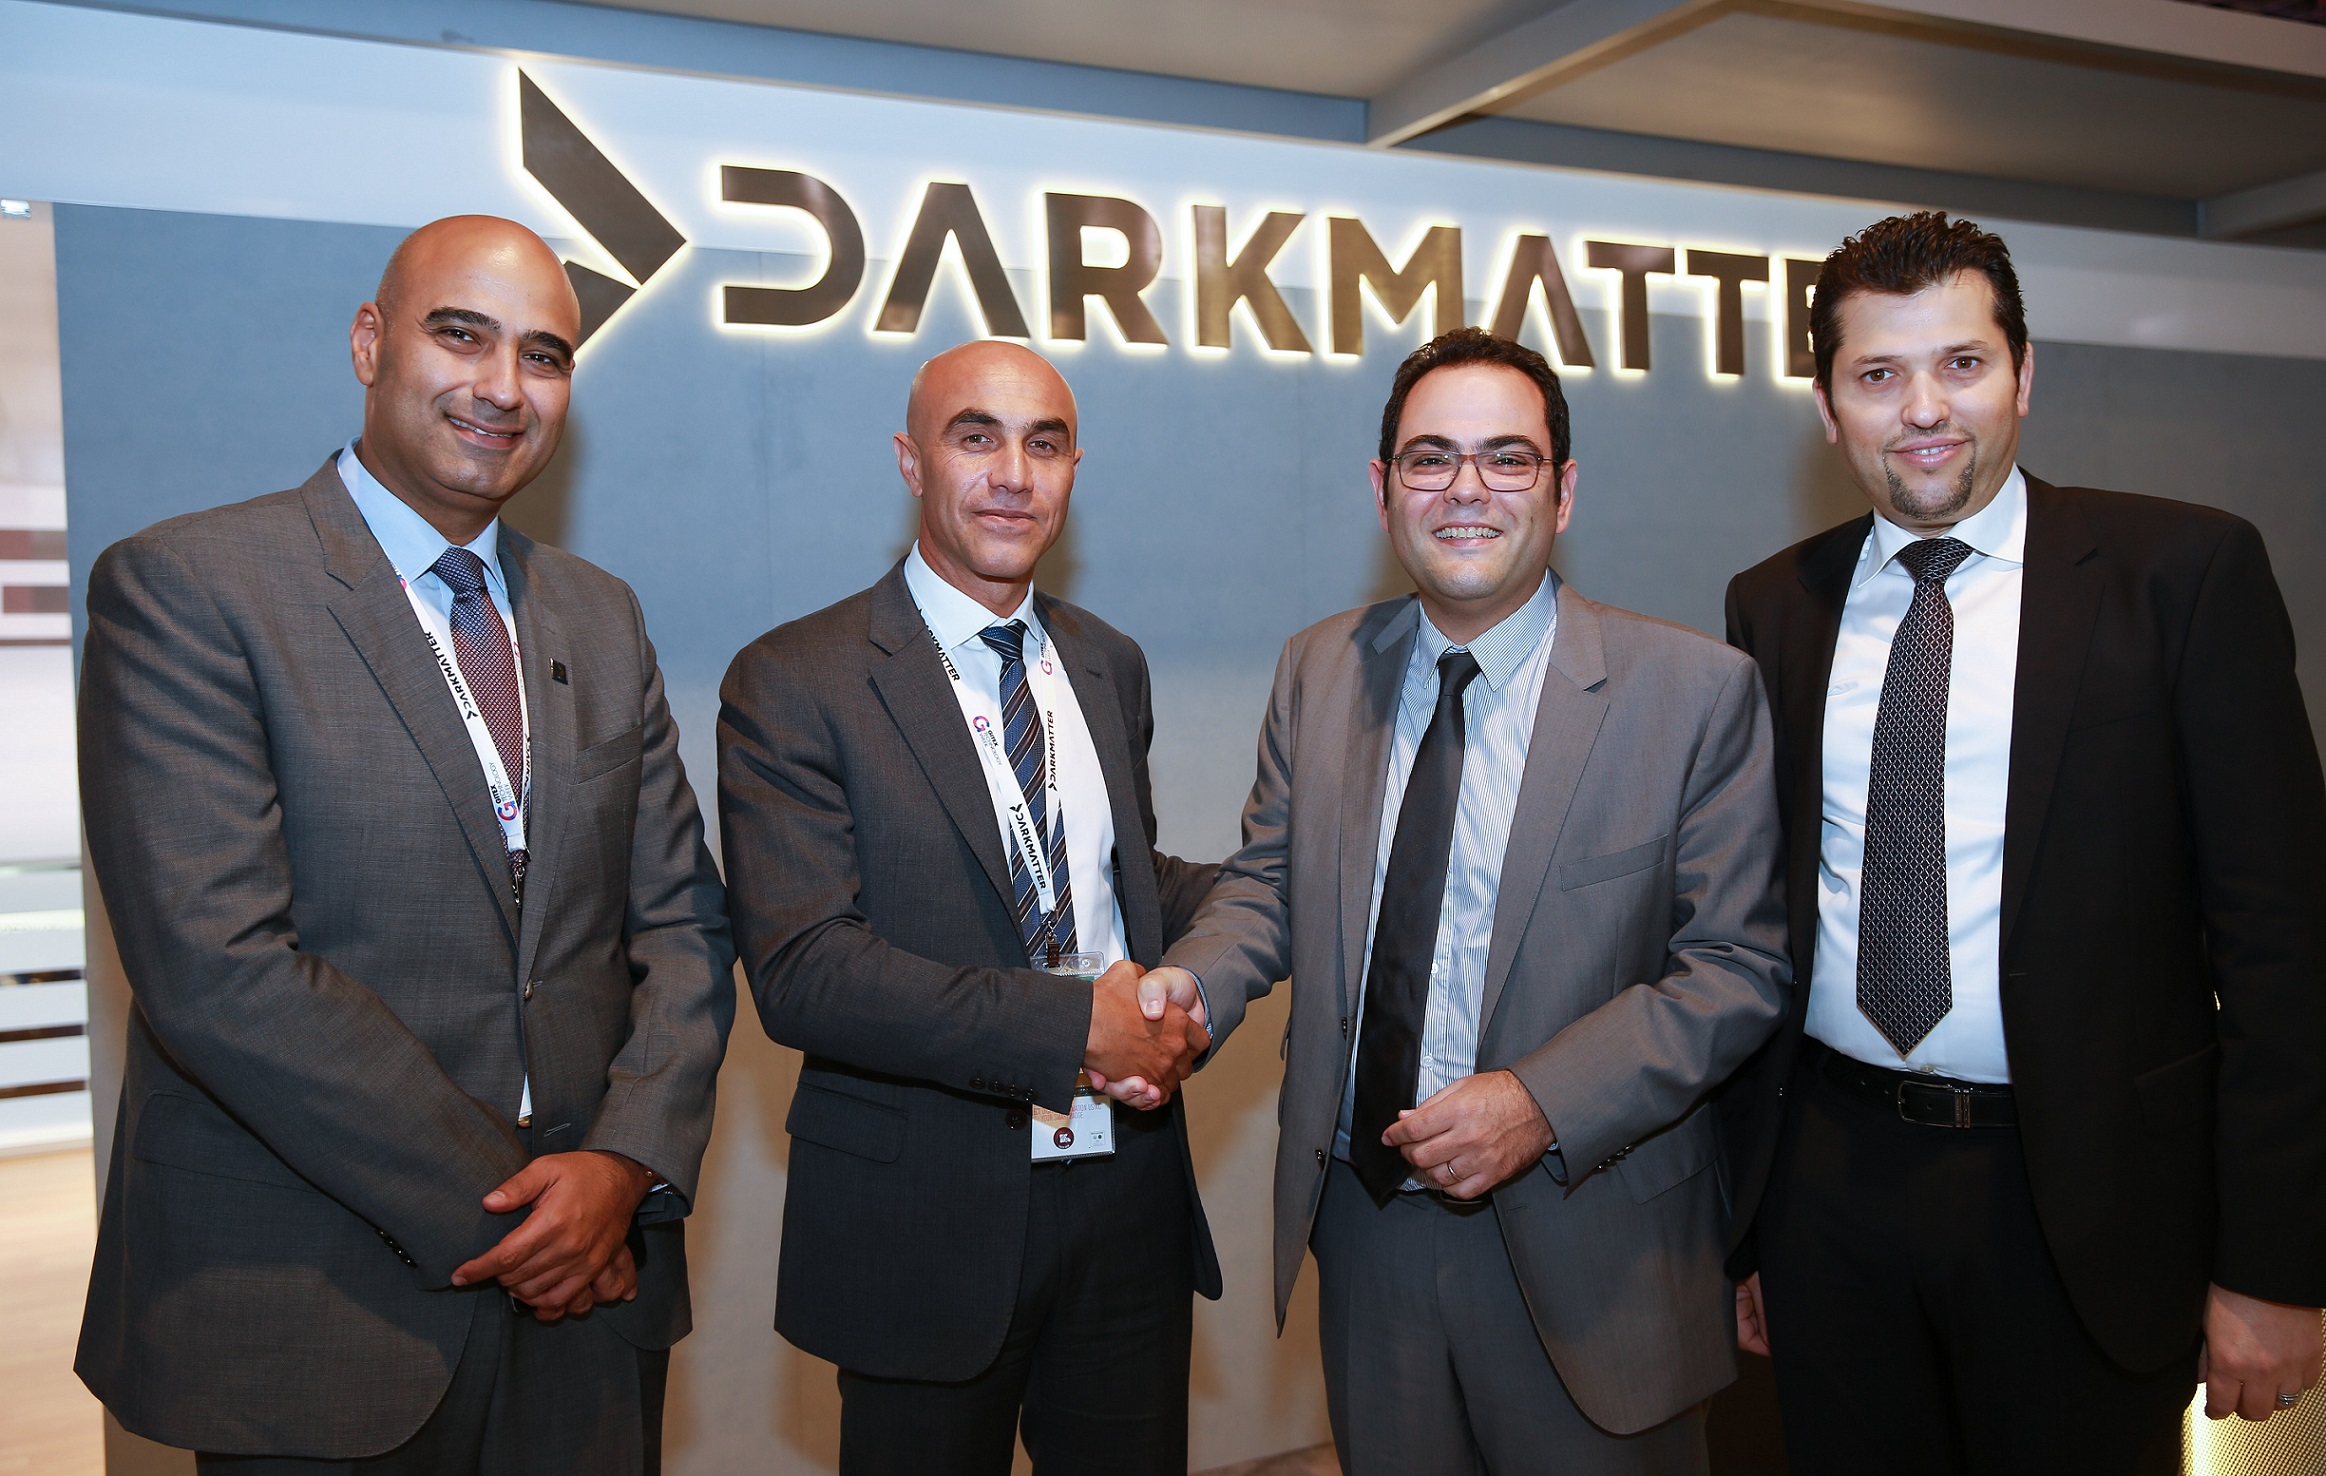 DarkMatter partnership with Microsoft Gulf to deliver security